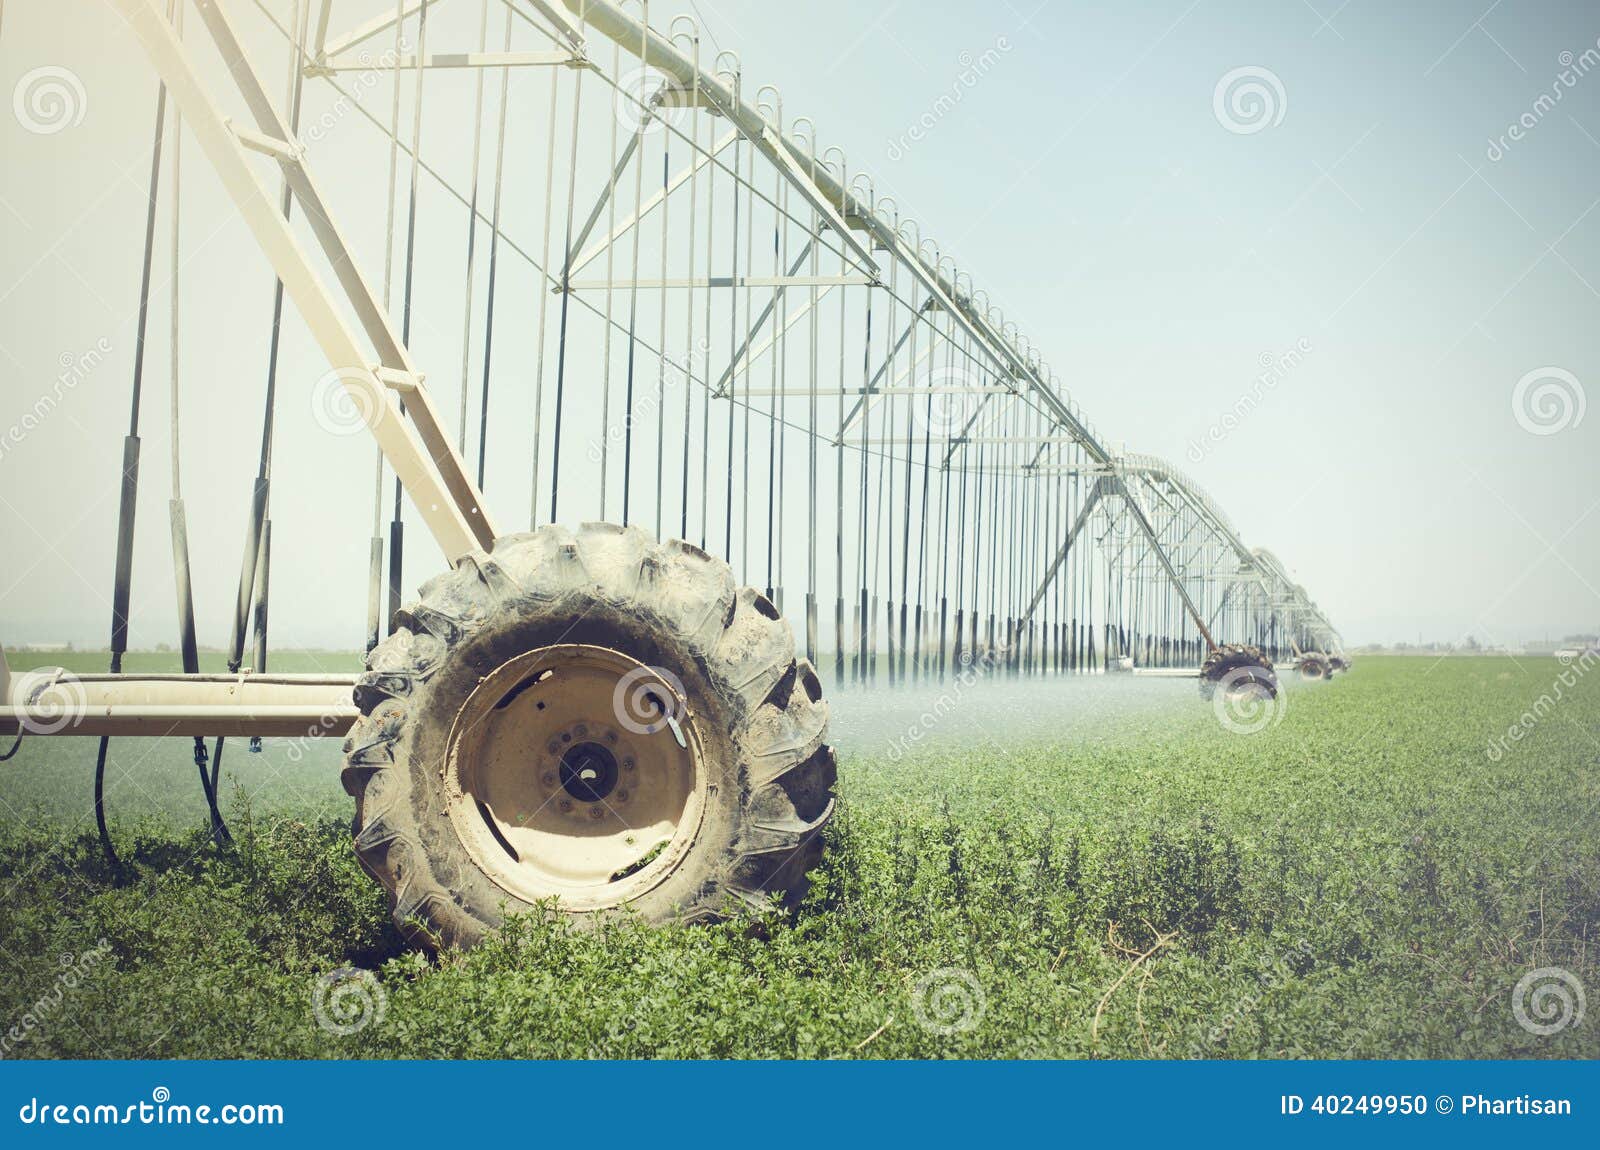 farm's crop being watered by sprinkler irrigation system